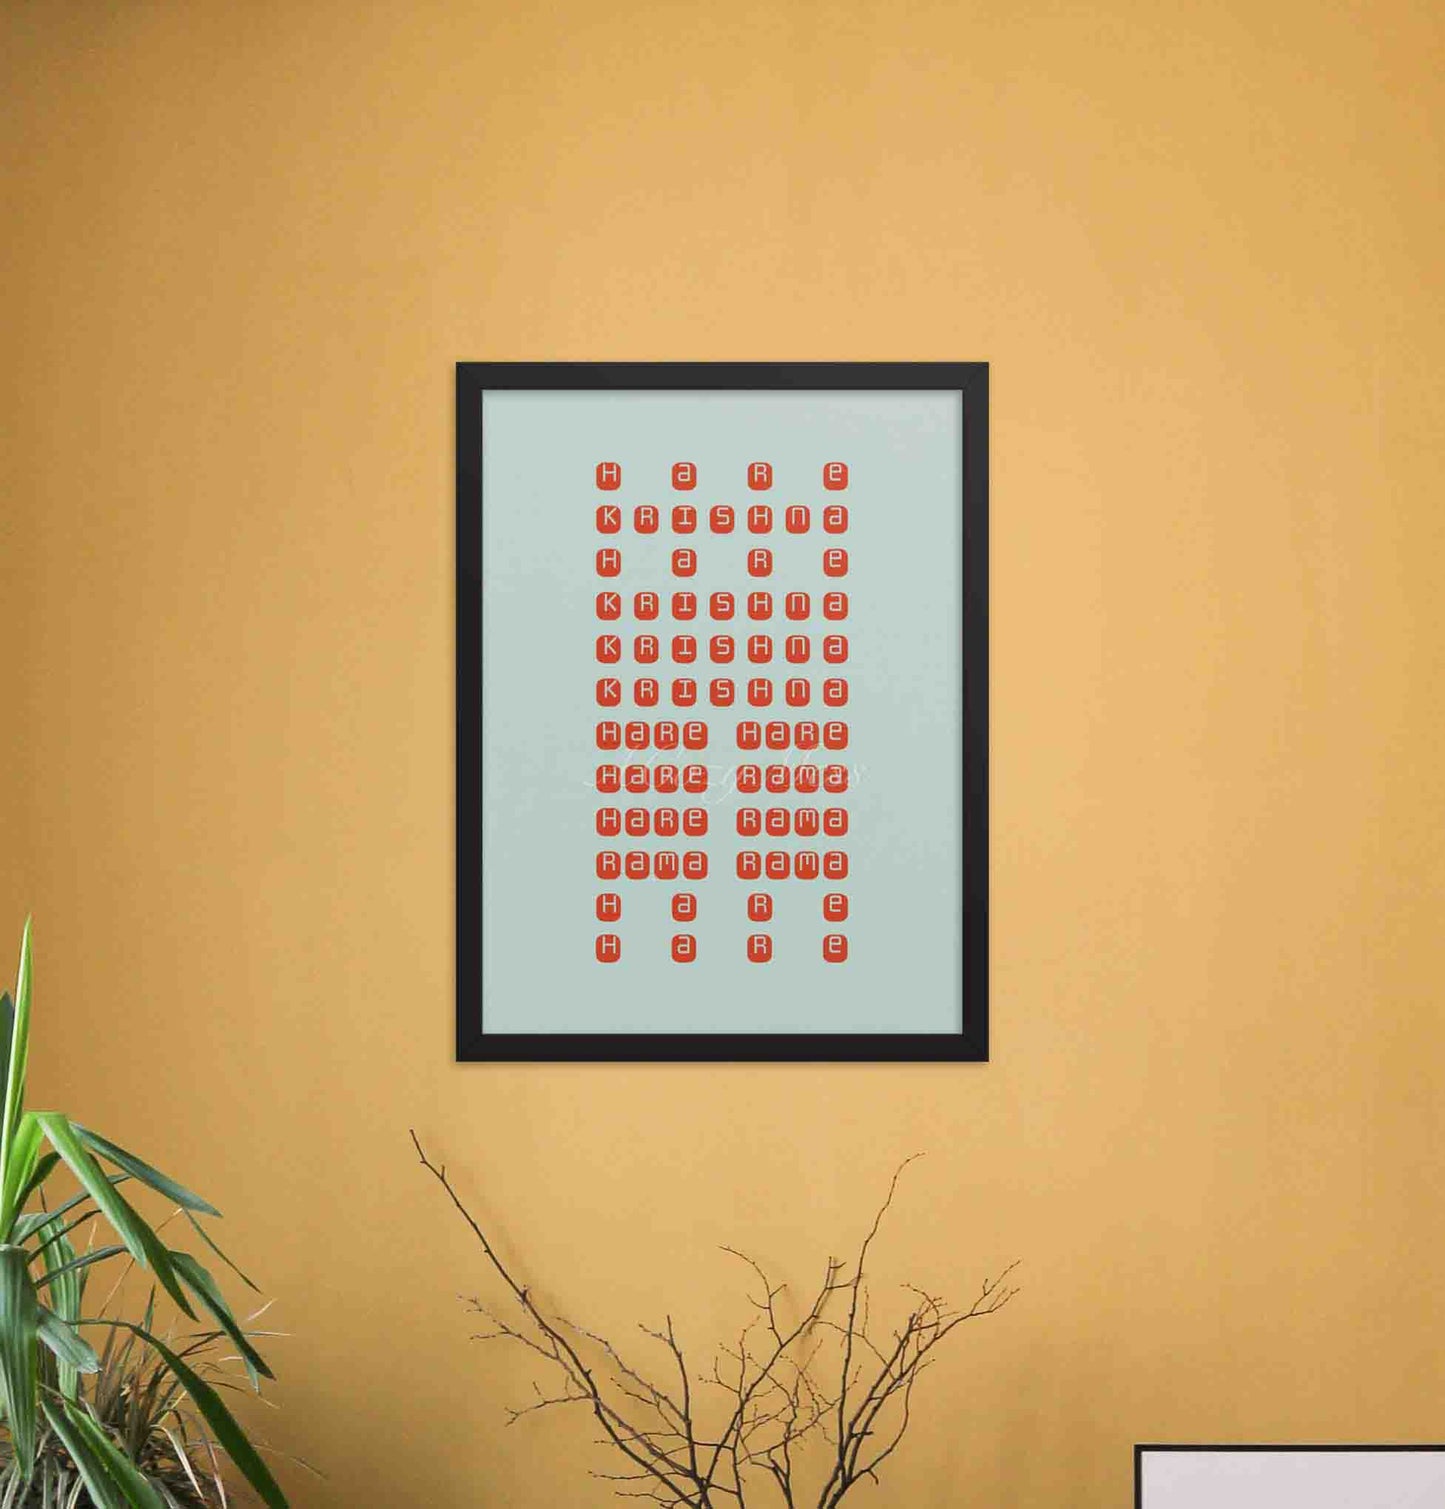 A black framed poster, featuring the Hare Krishna mantra arranged in a grid-like pattern, in red color against a mint green background.